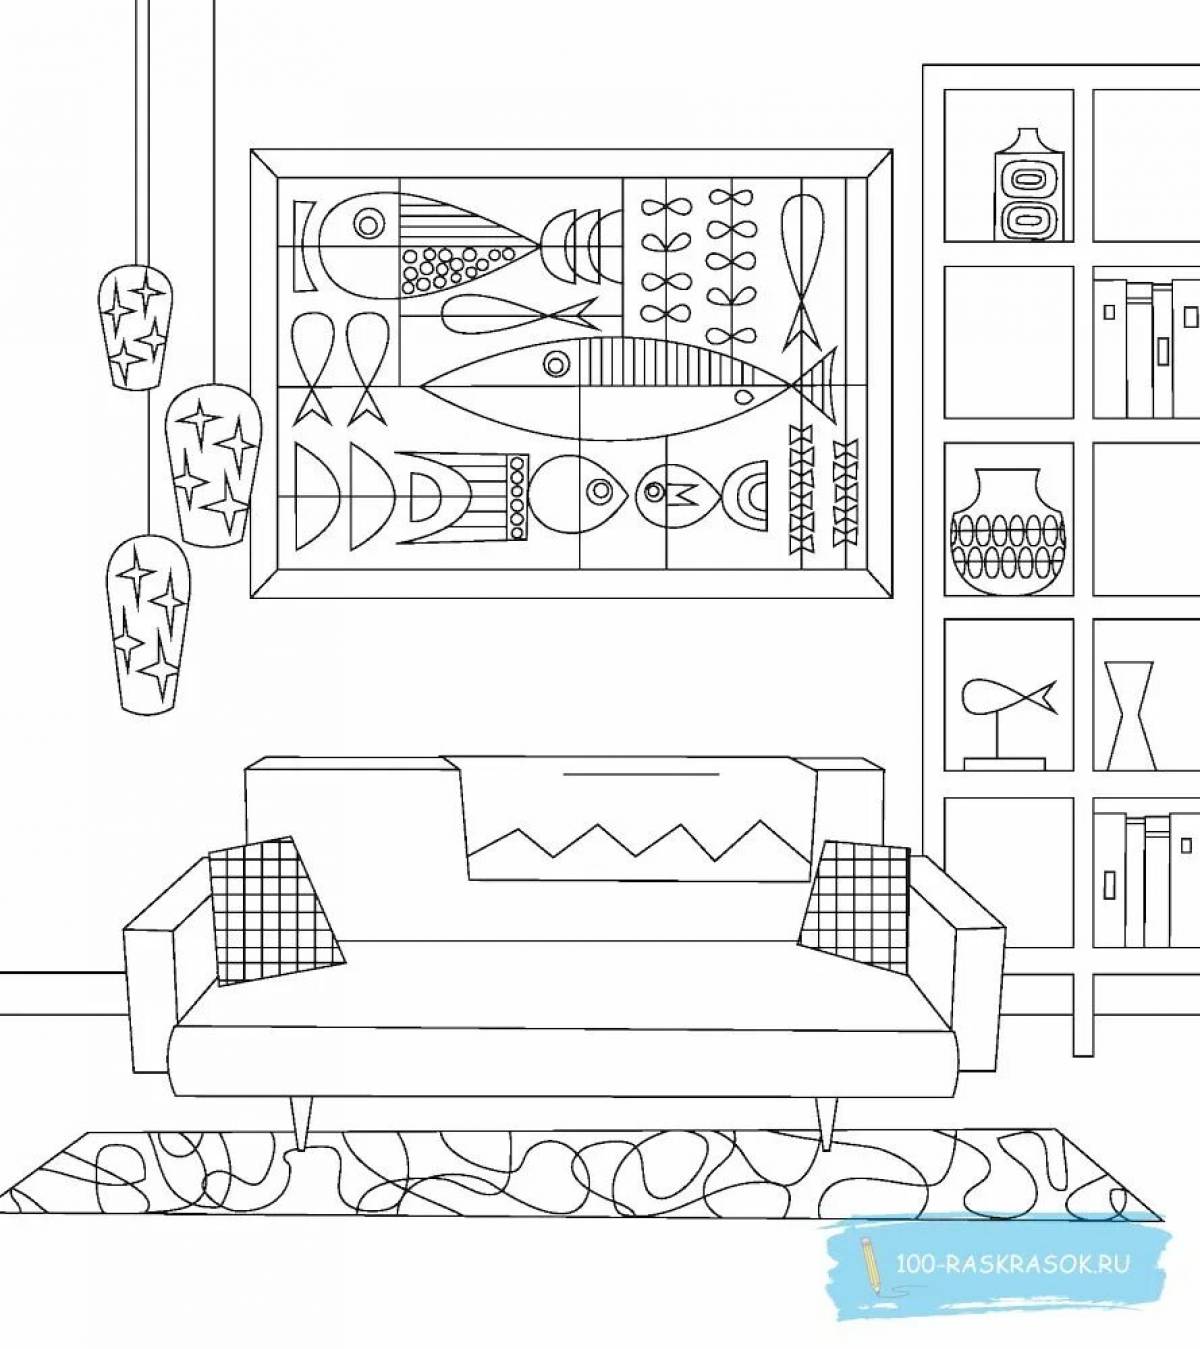 Paper doll house #2